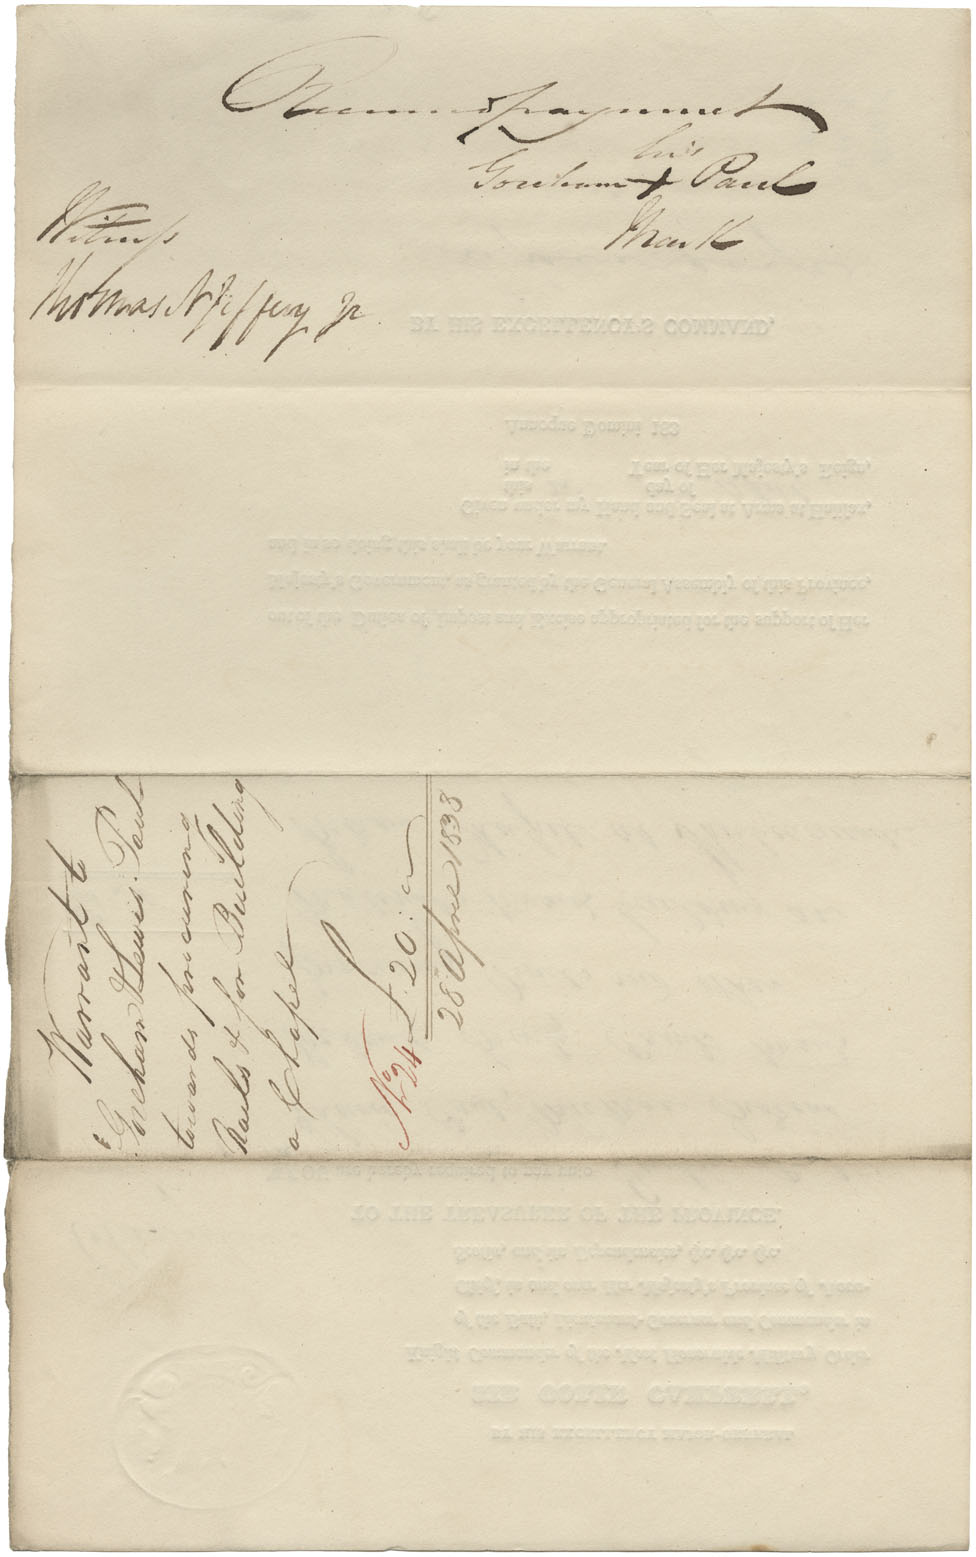 Warrant from Sir Colin Campbell to Graham Paul for £20-0-0 for building a chapel at Shubenacadie. 